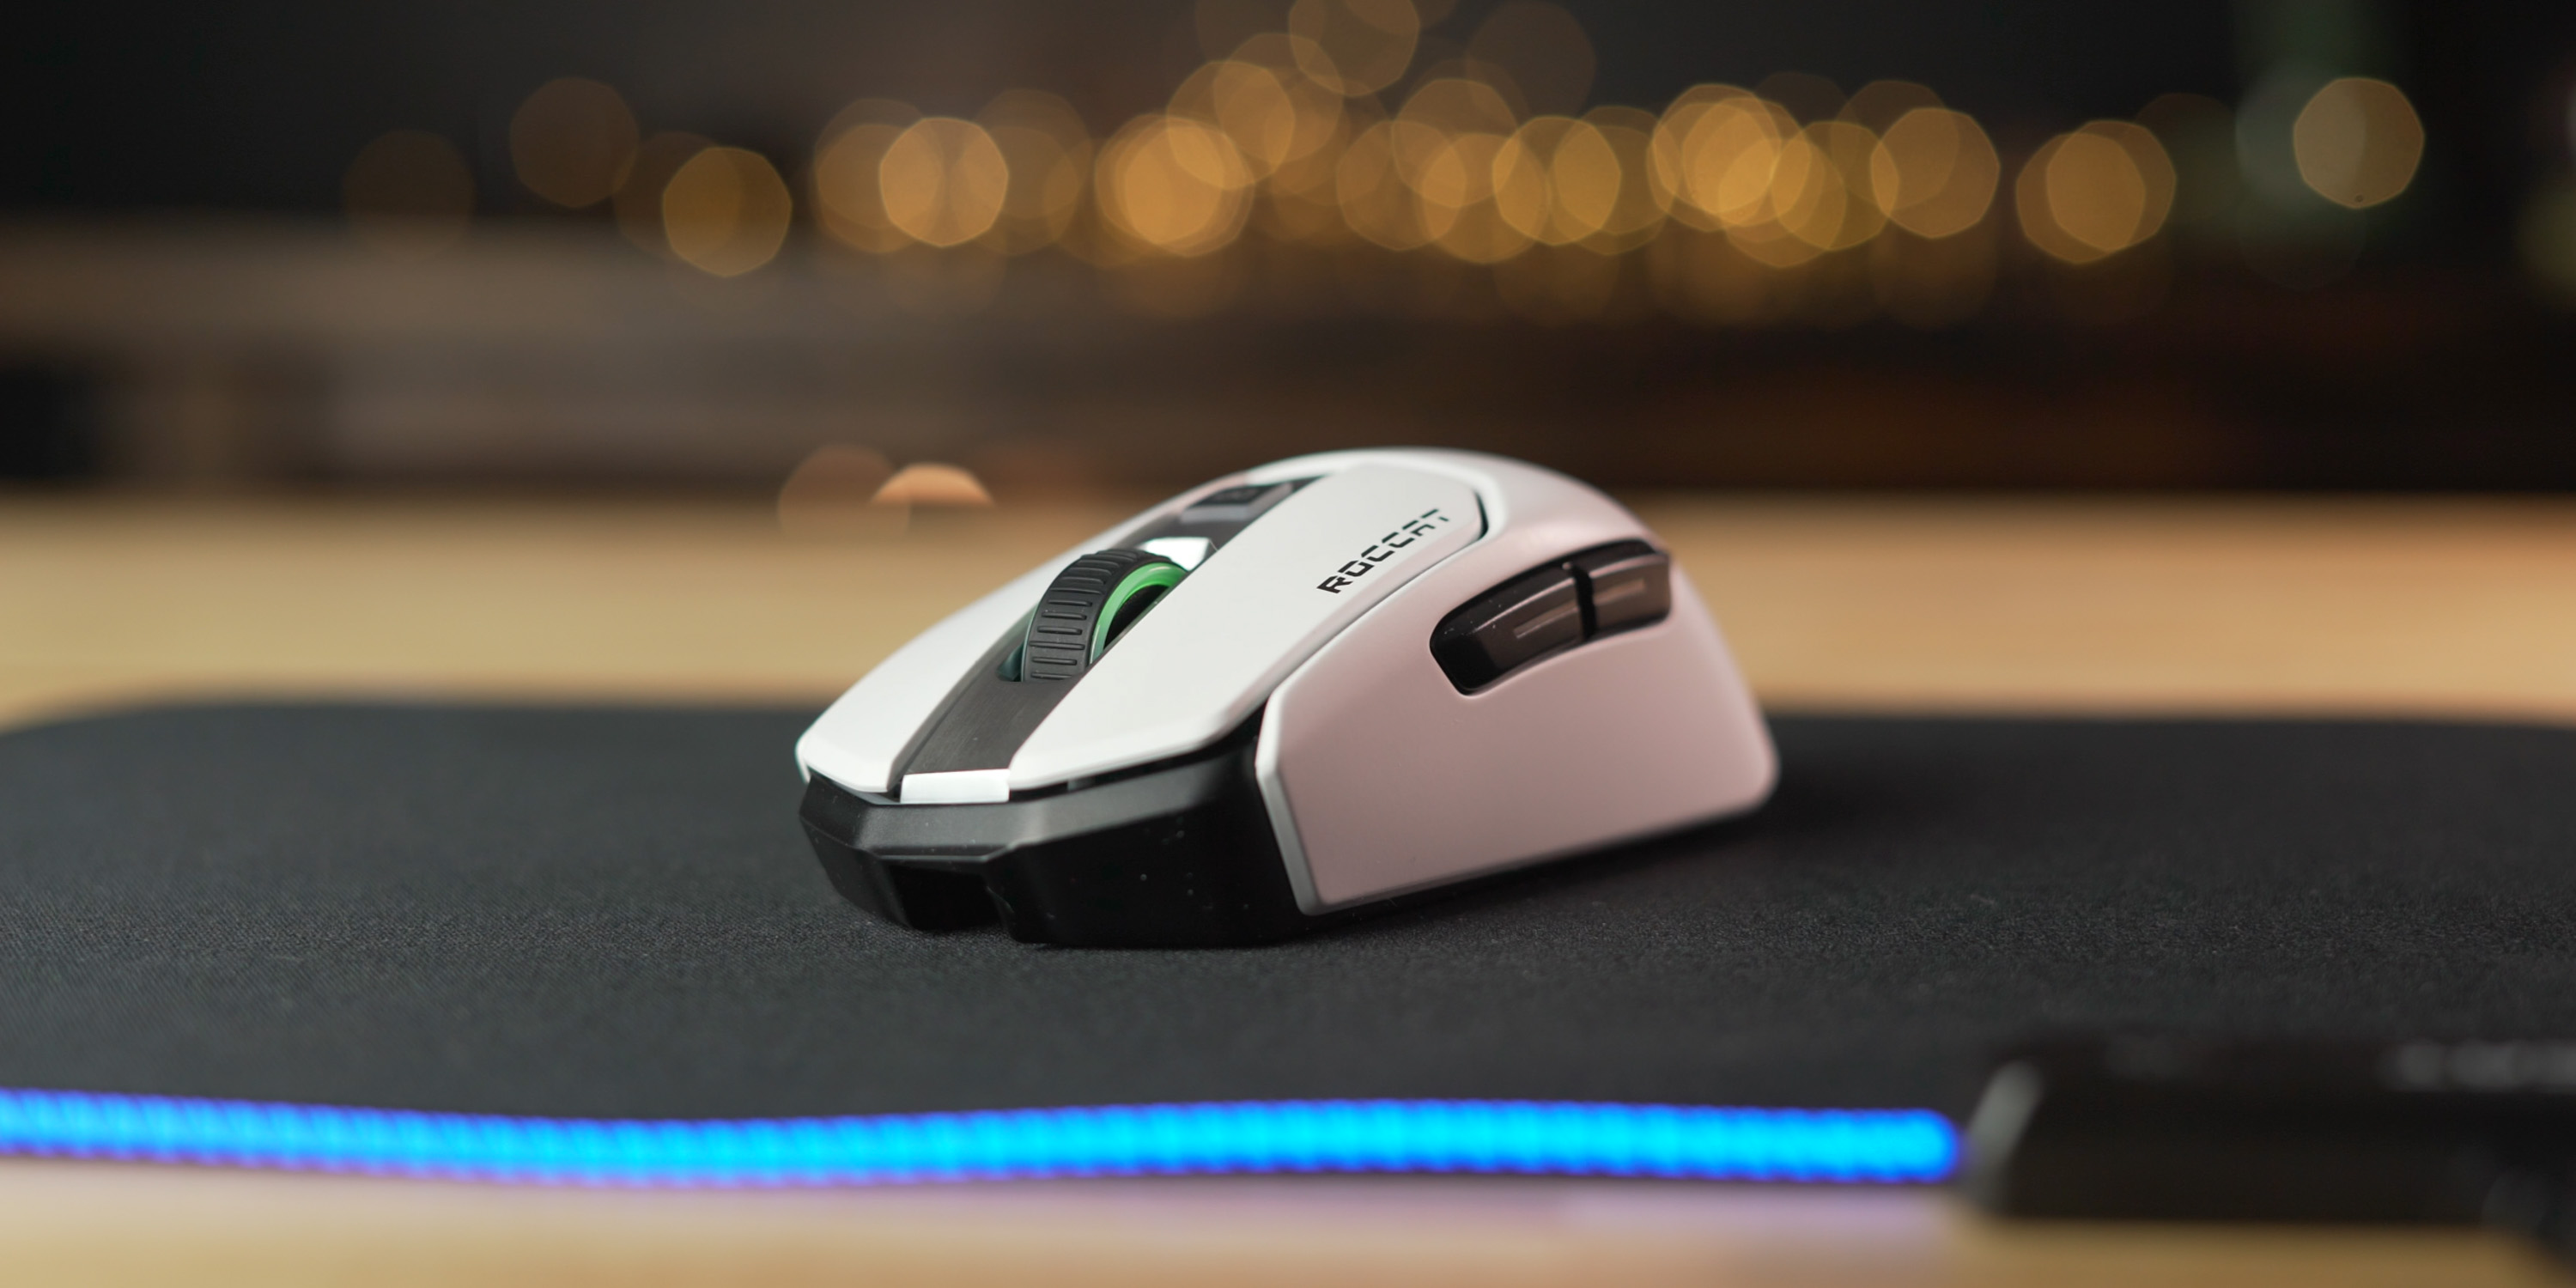 Roccat Kain 200 AIMO mouse